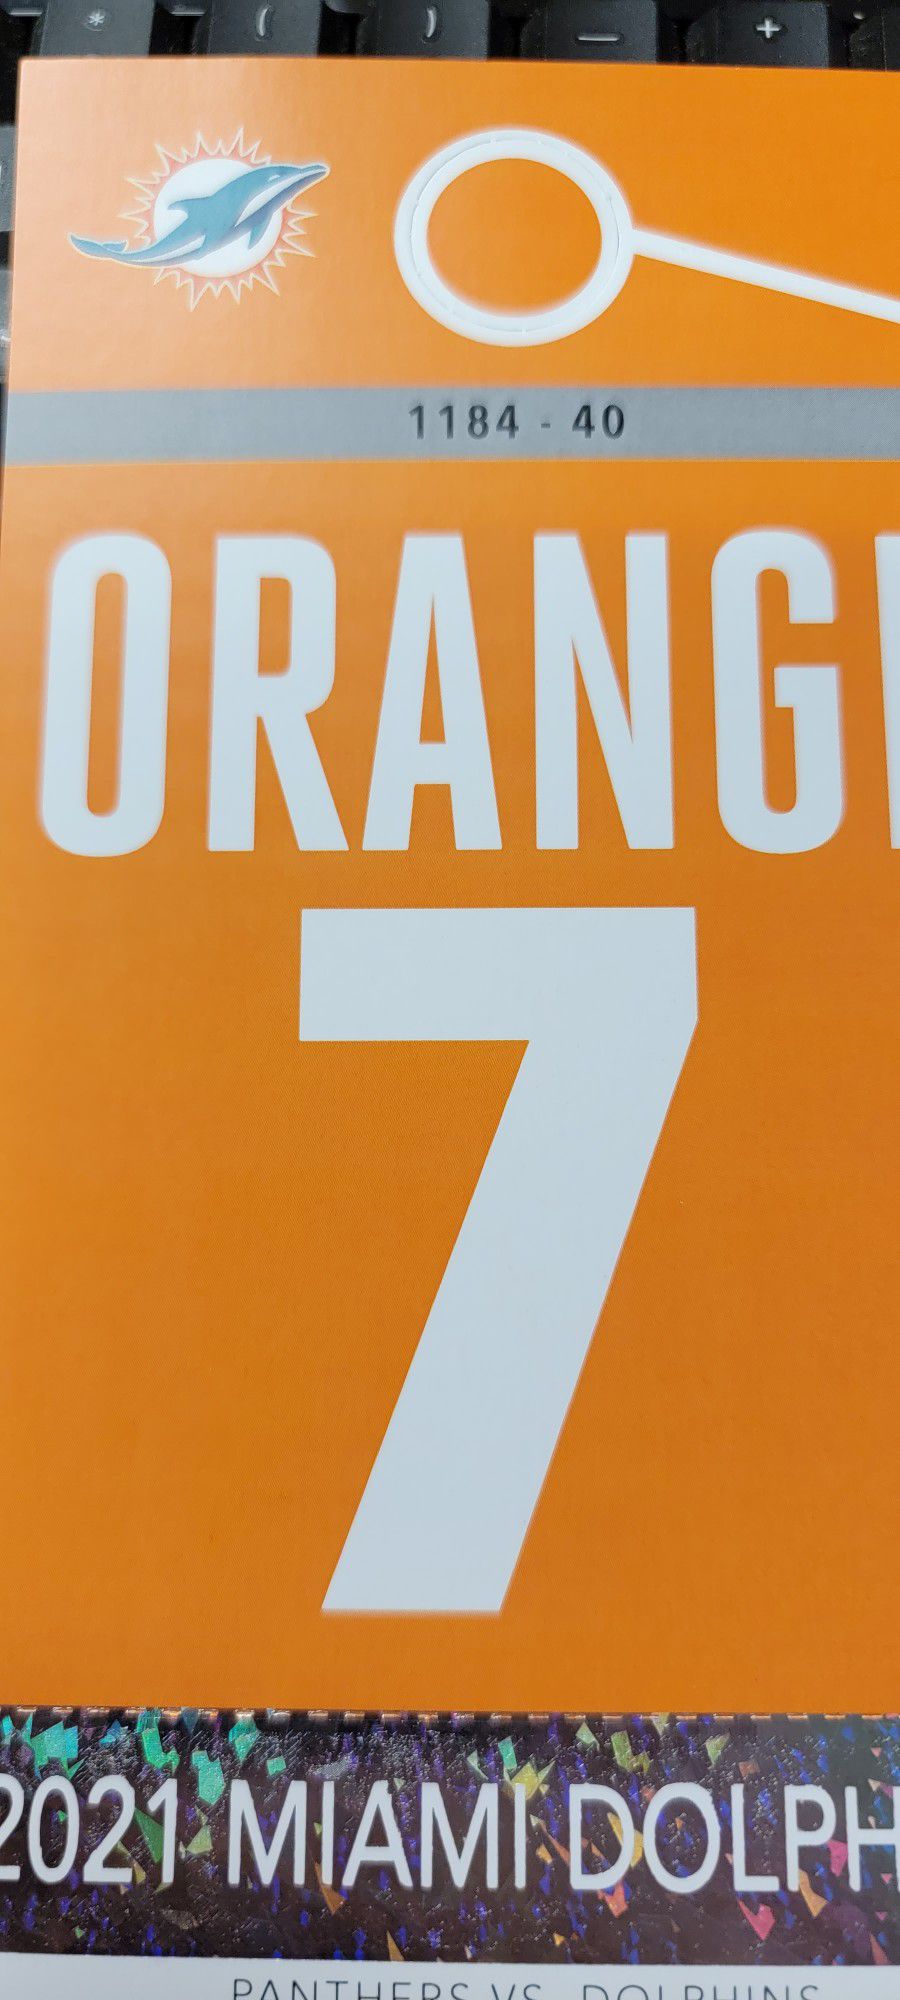 Dolphins Vs Panthers 11/28 Orange Parking Pass